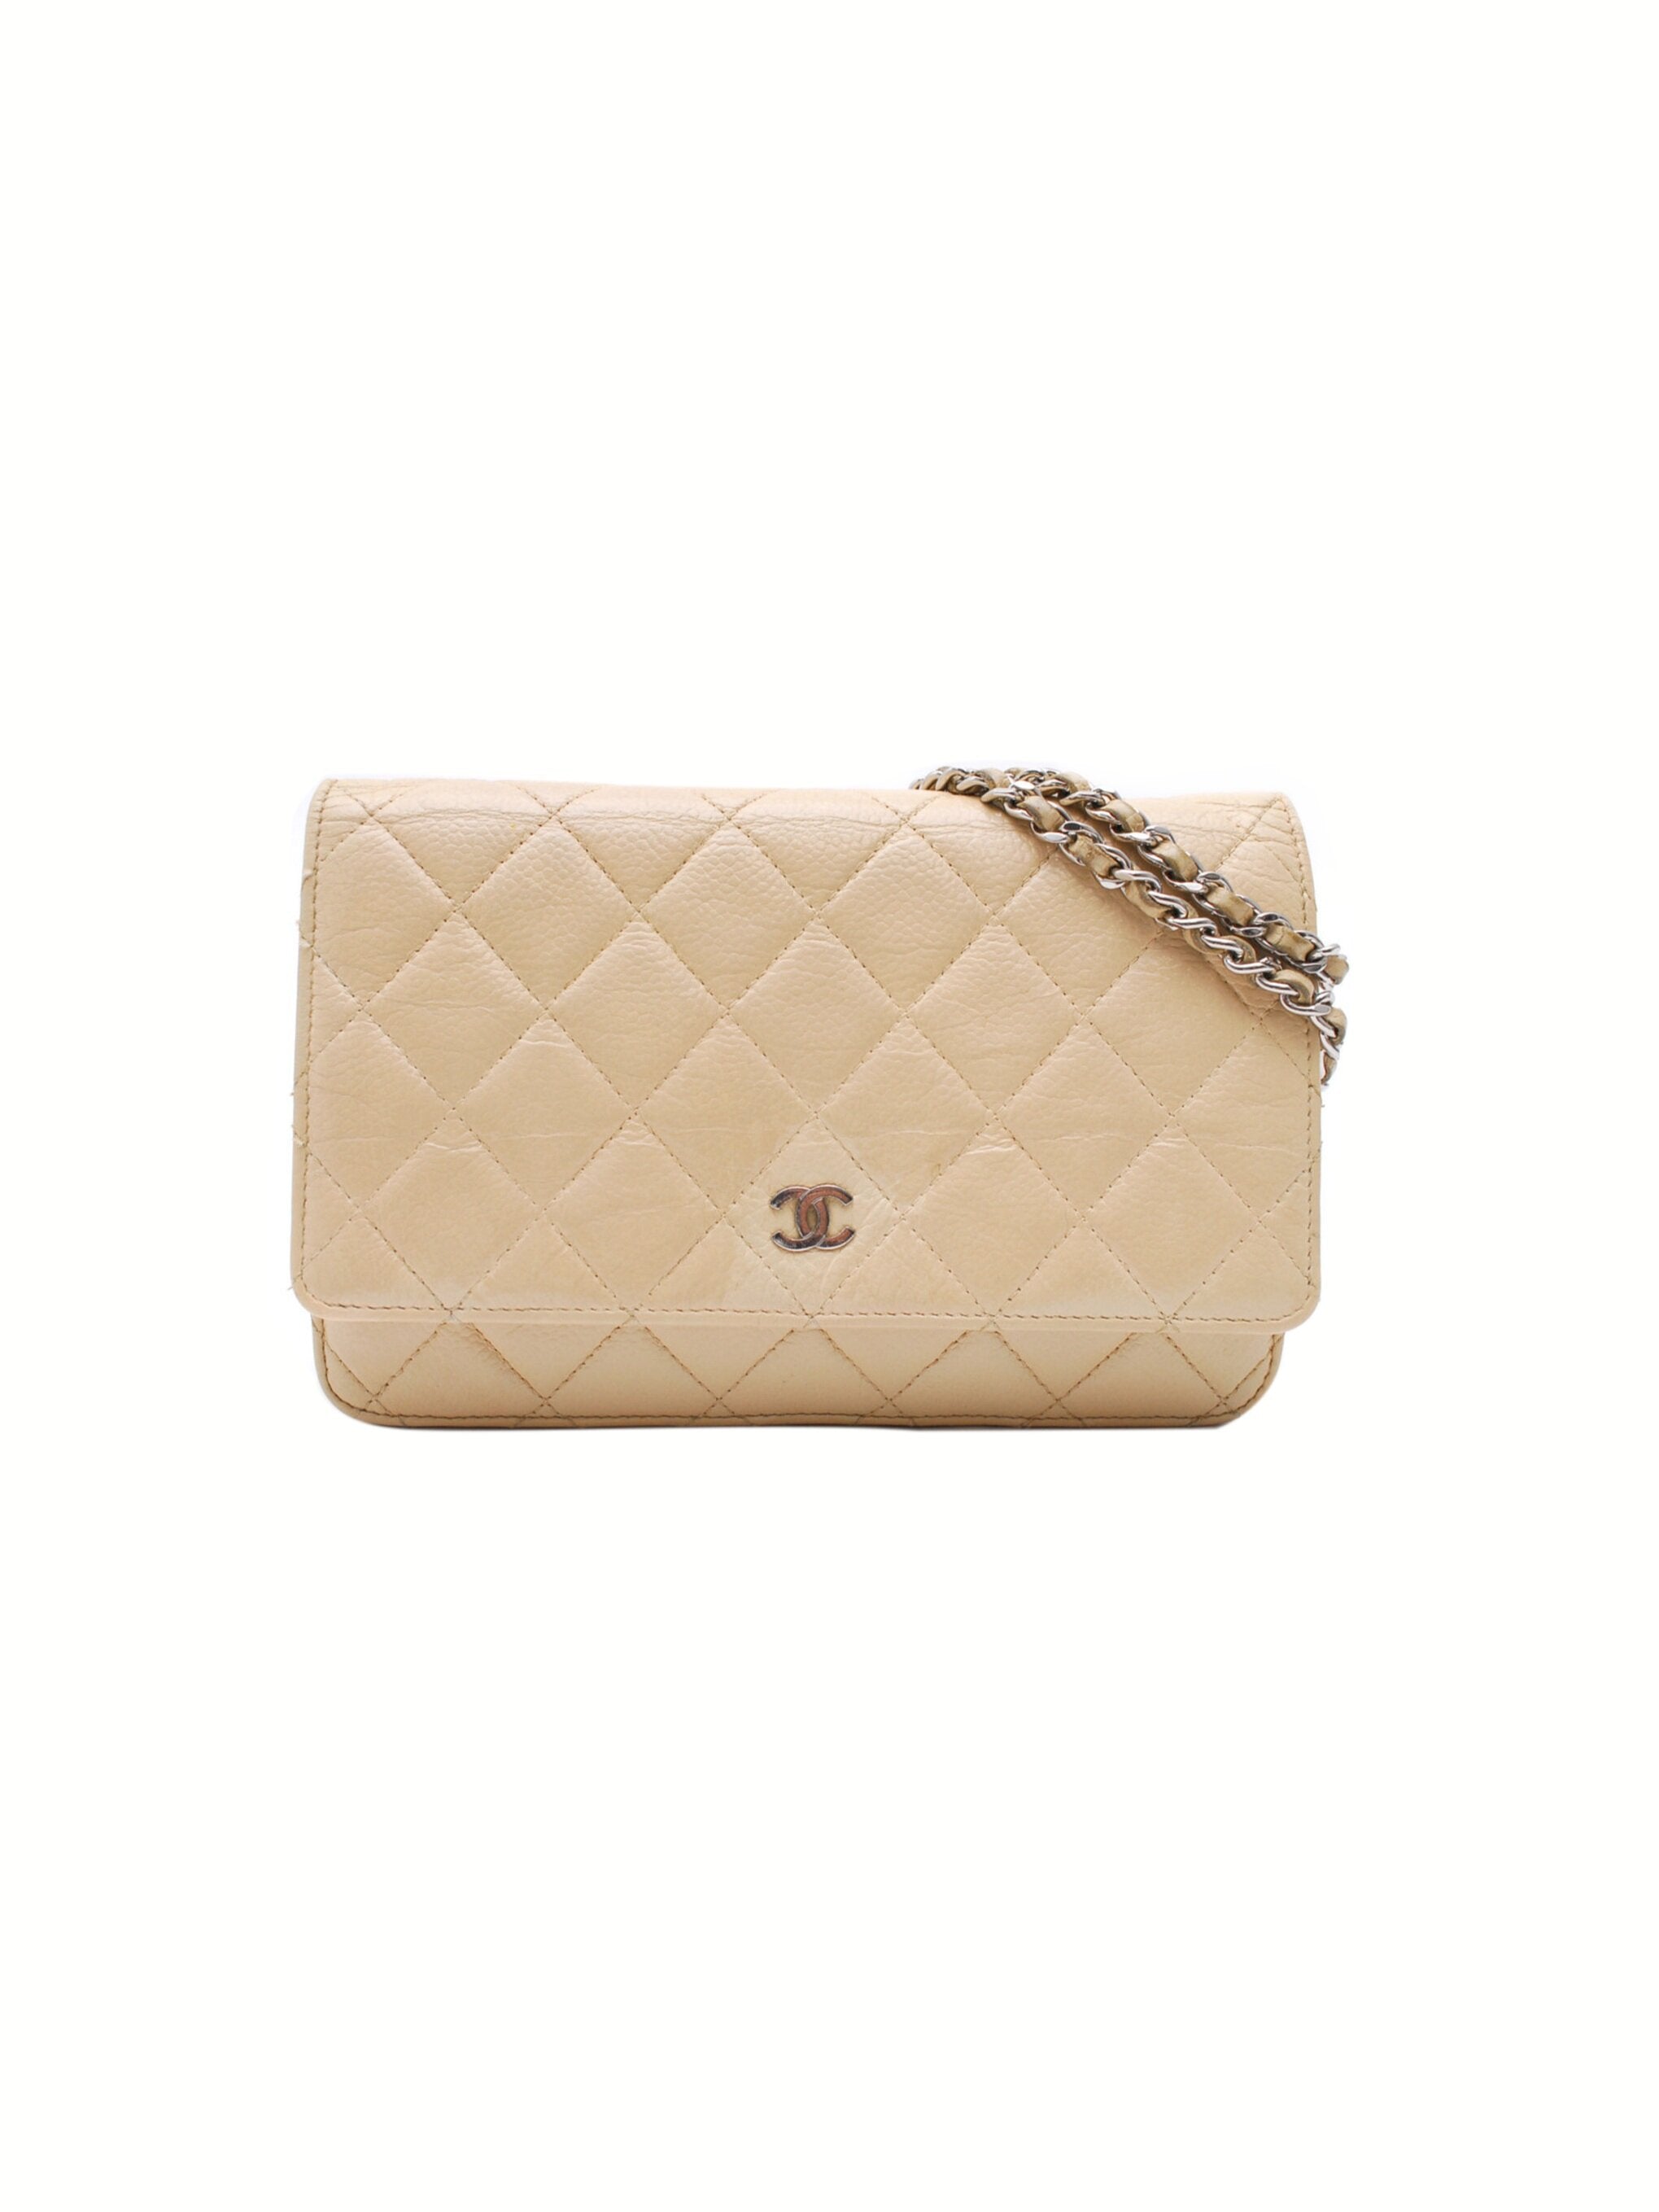 Chanel Light Beige Iridescent Quilted Caviar New Clutch With Chain